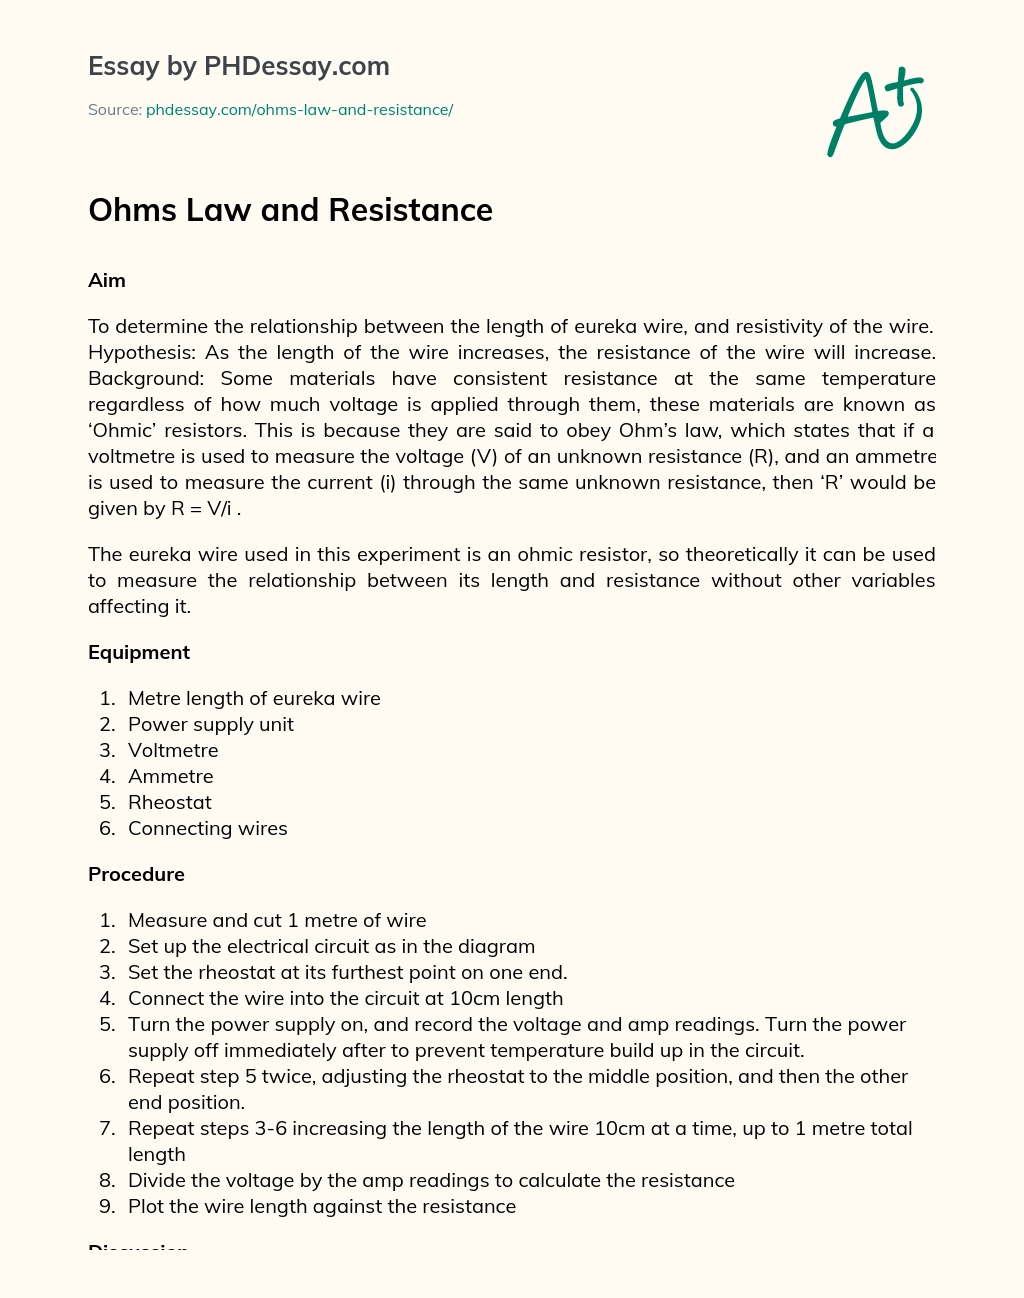 Ohms Law and Resistance essay